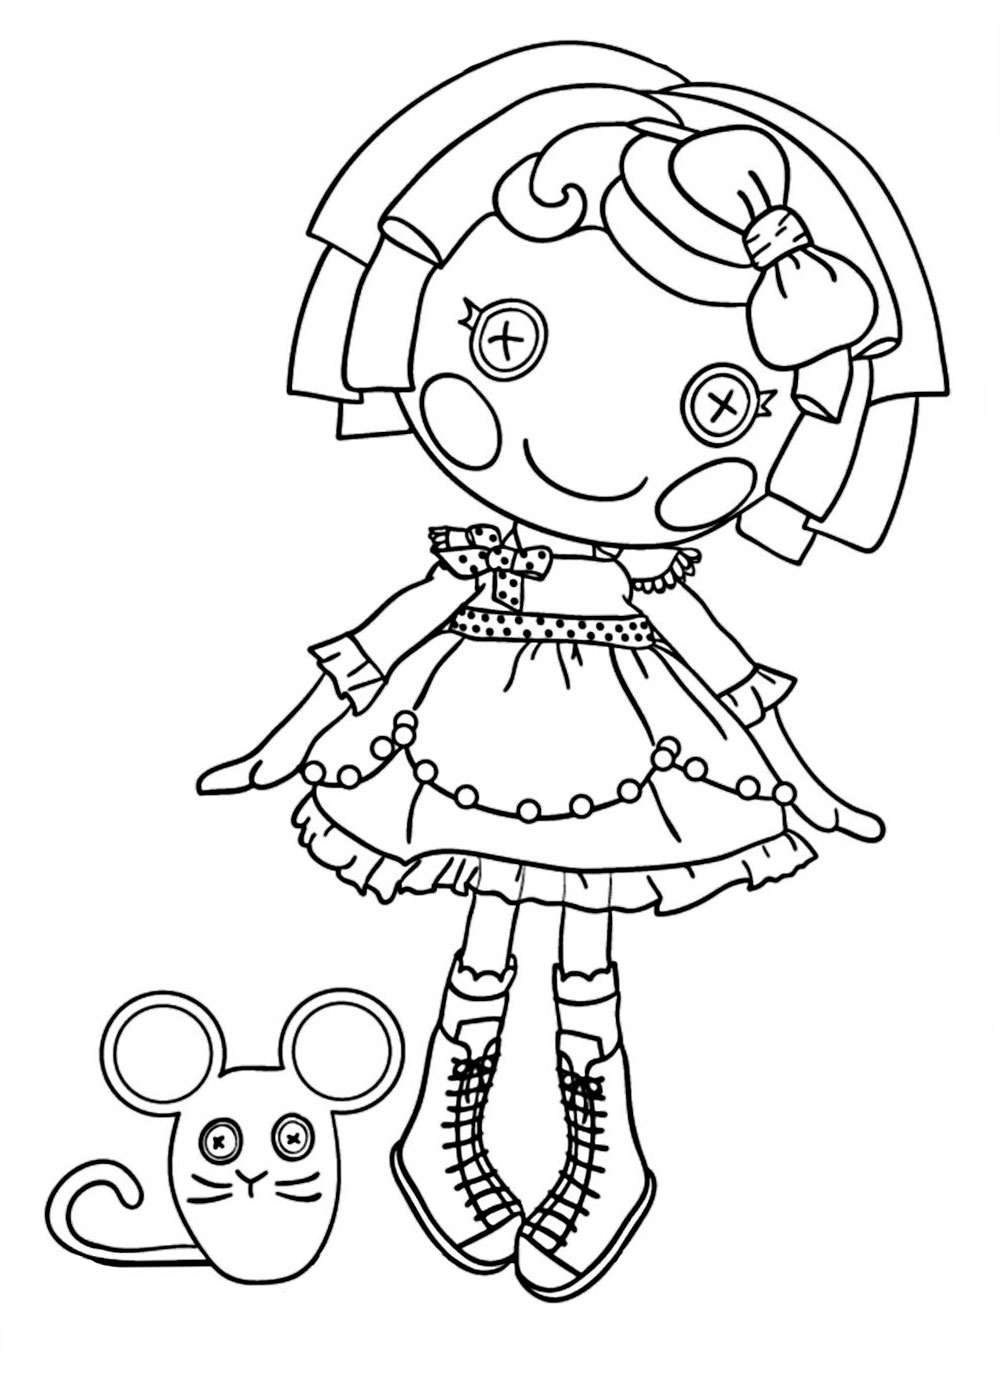 free-printable-lalaloopsy-coloring-pages-free-download-gambr-co